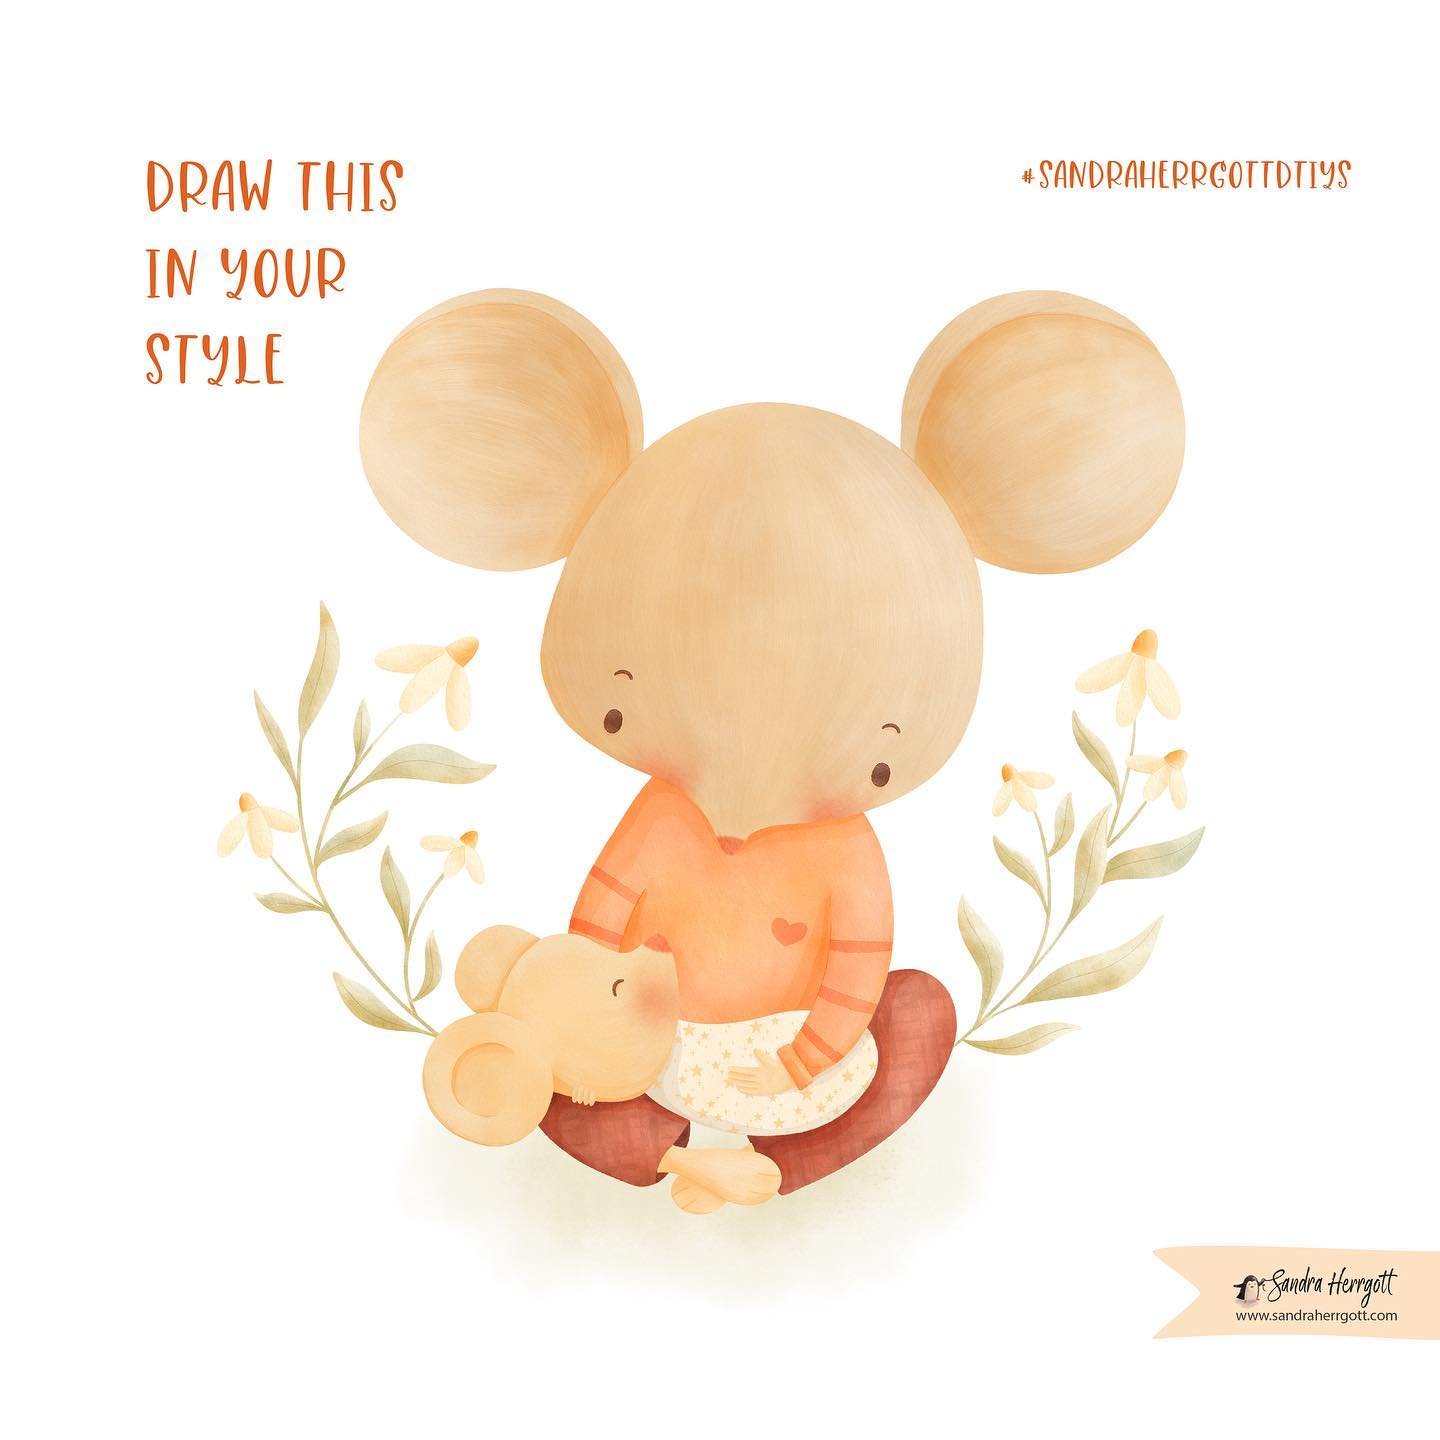 You are invited to join my second draw this in your style challenge: Mama Mouse with little one. Swipe to see the colouring time lapse.
.
You can get the coloring in template for free plus some other freebies, when you subscribe to my newsletter.
.
D